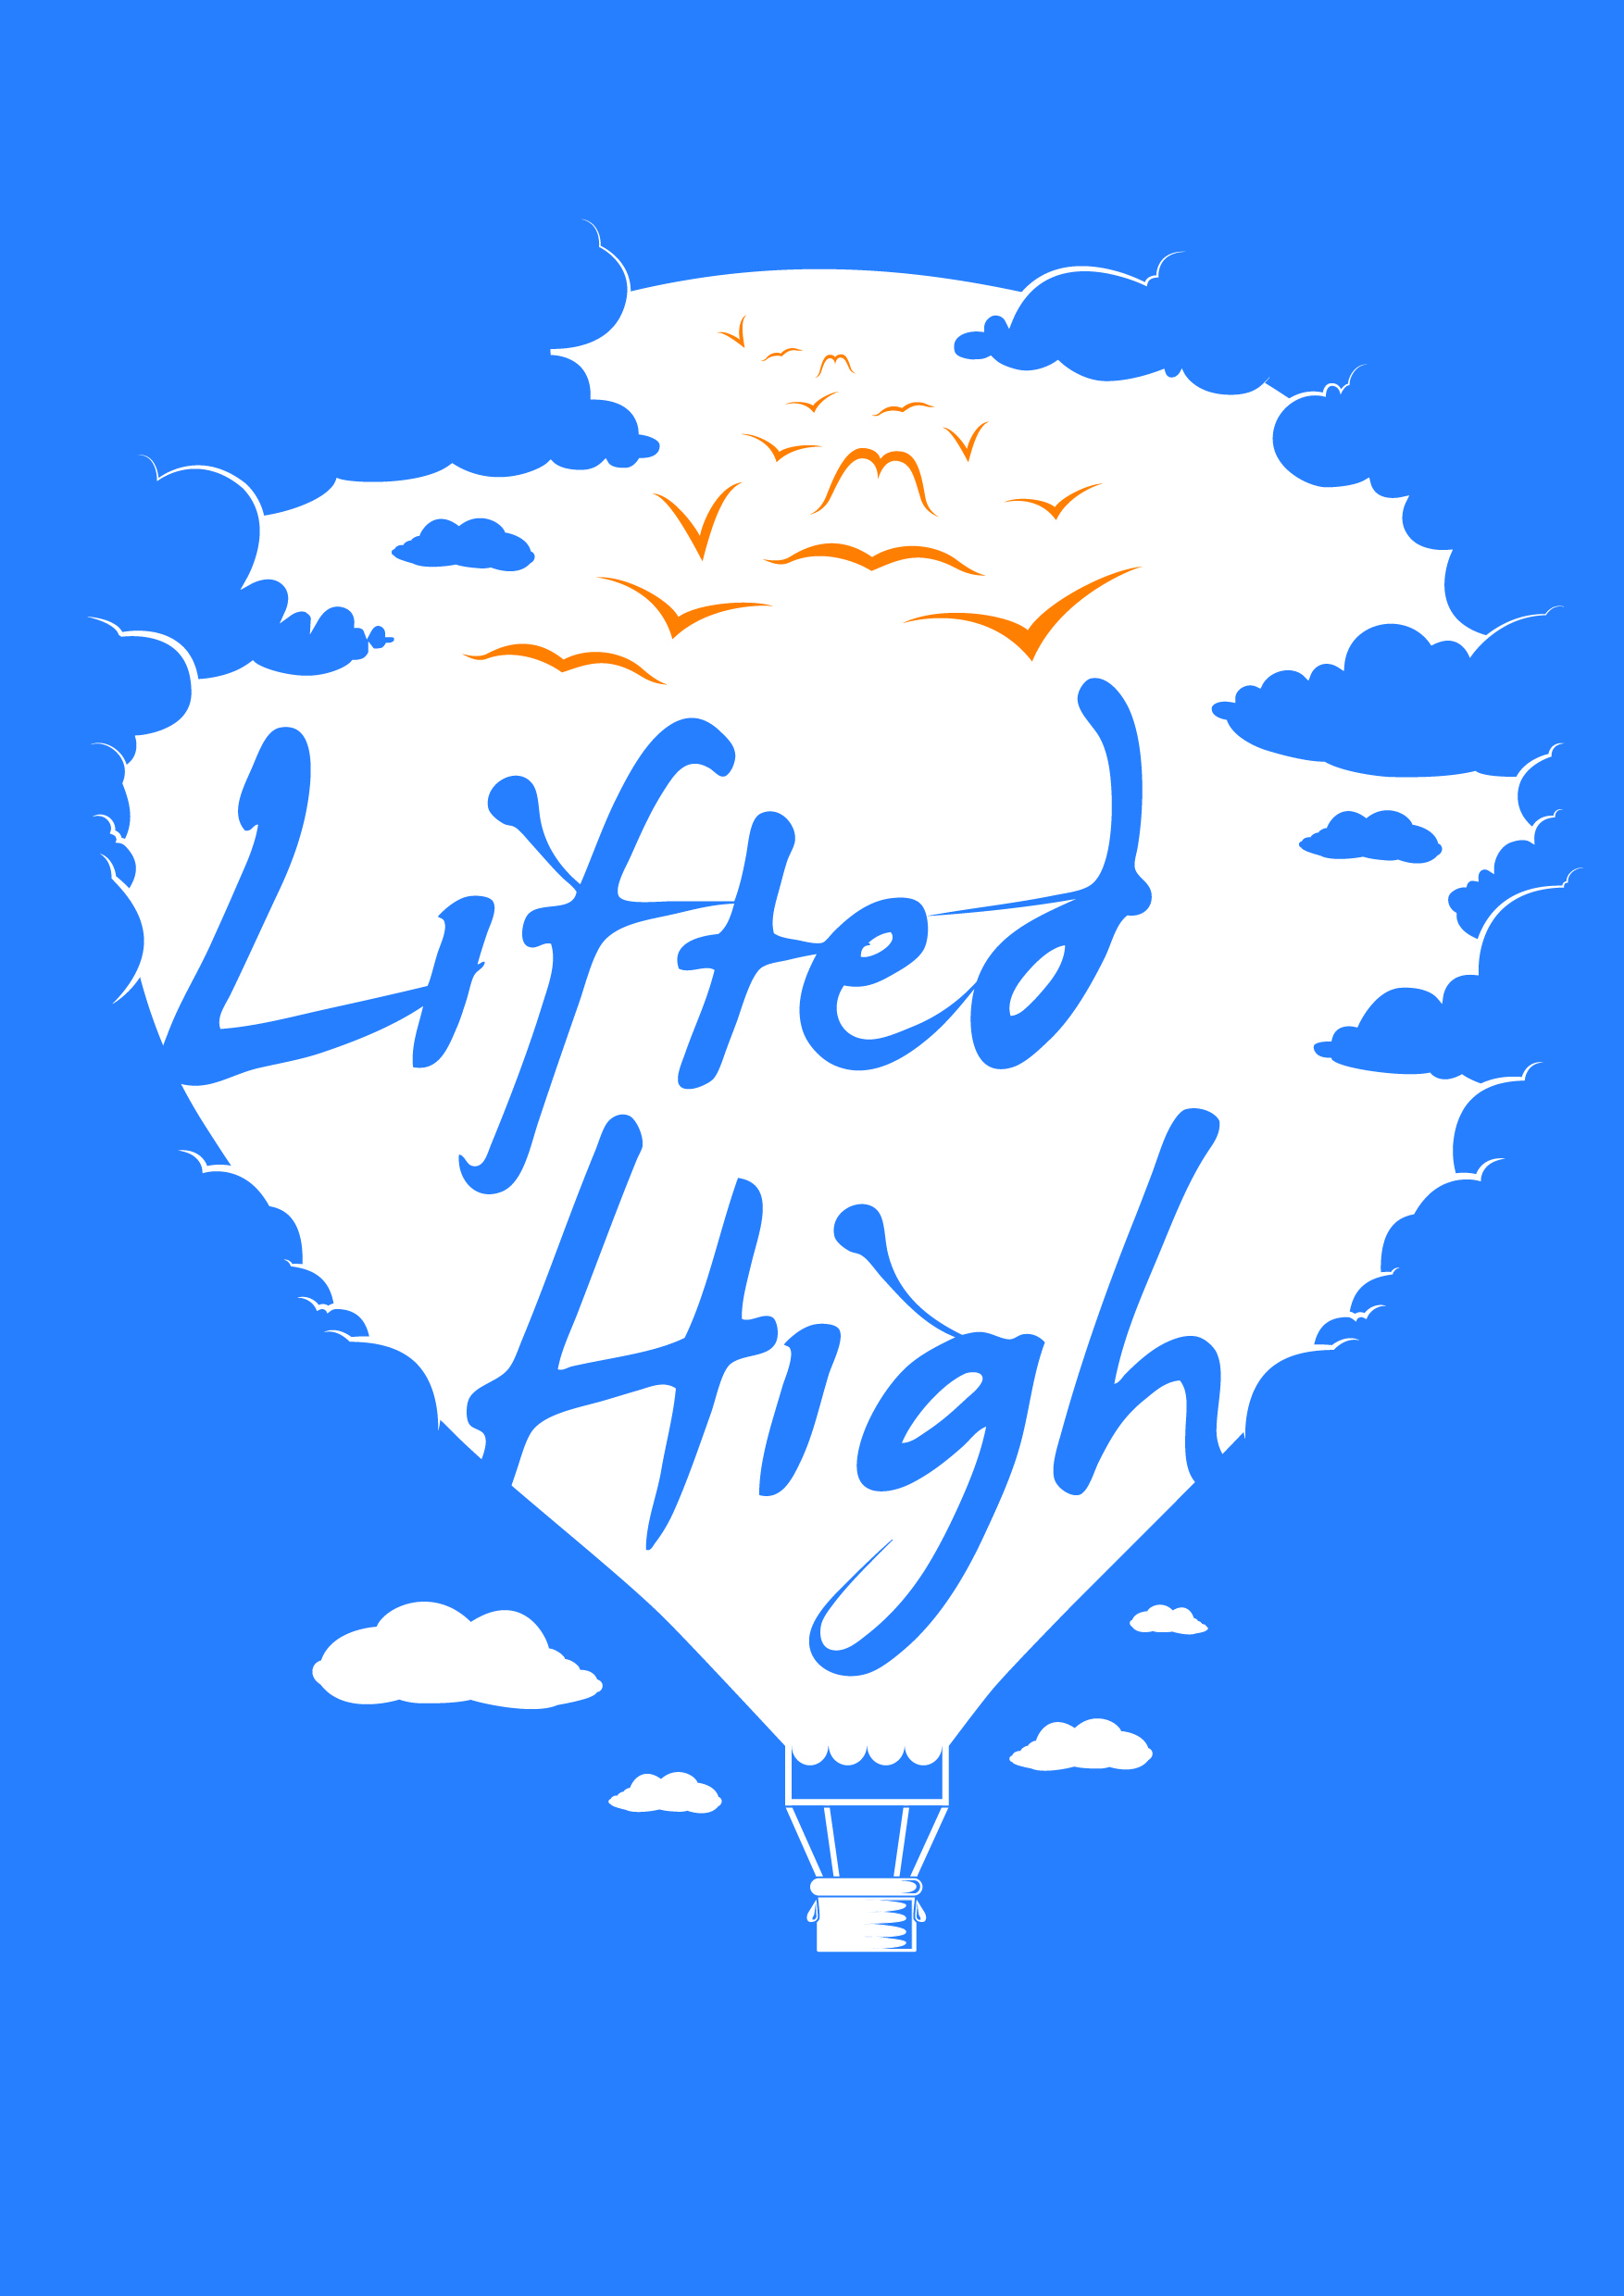 Image result for lifted high